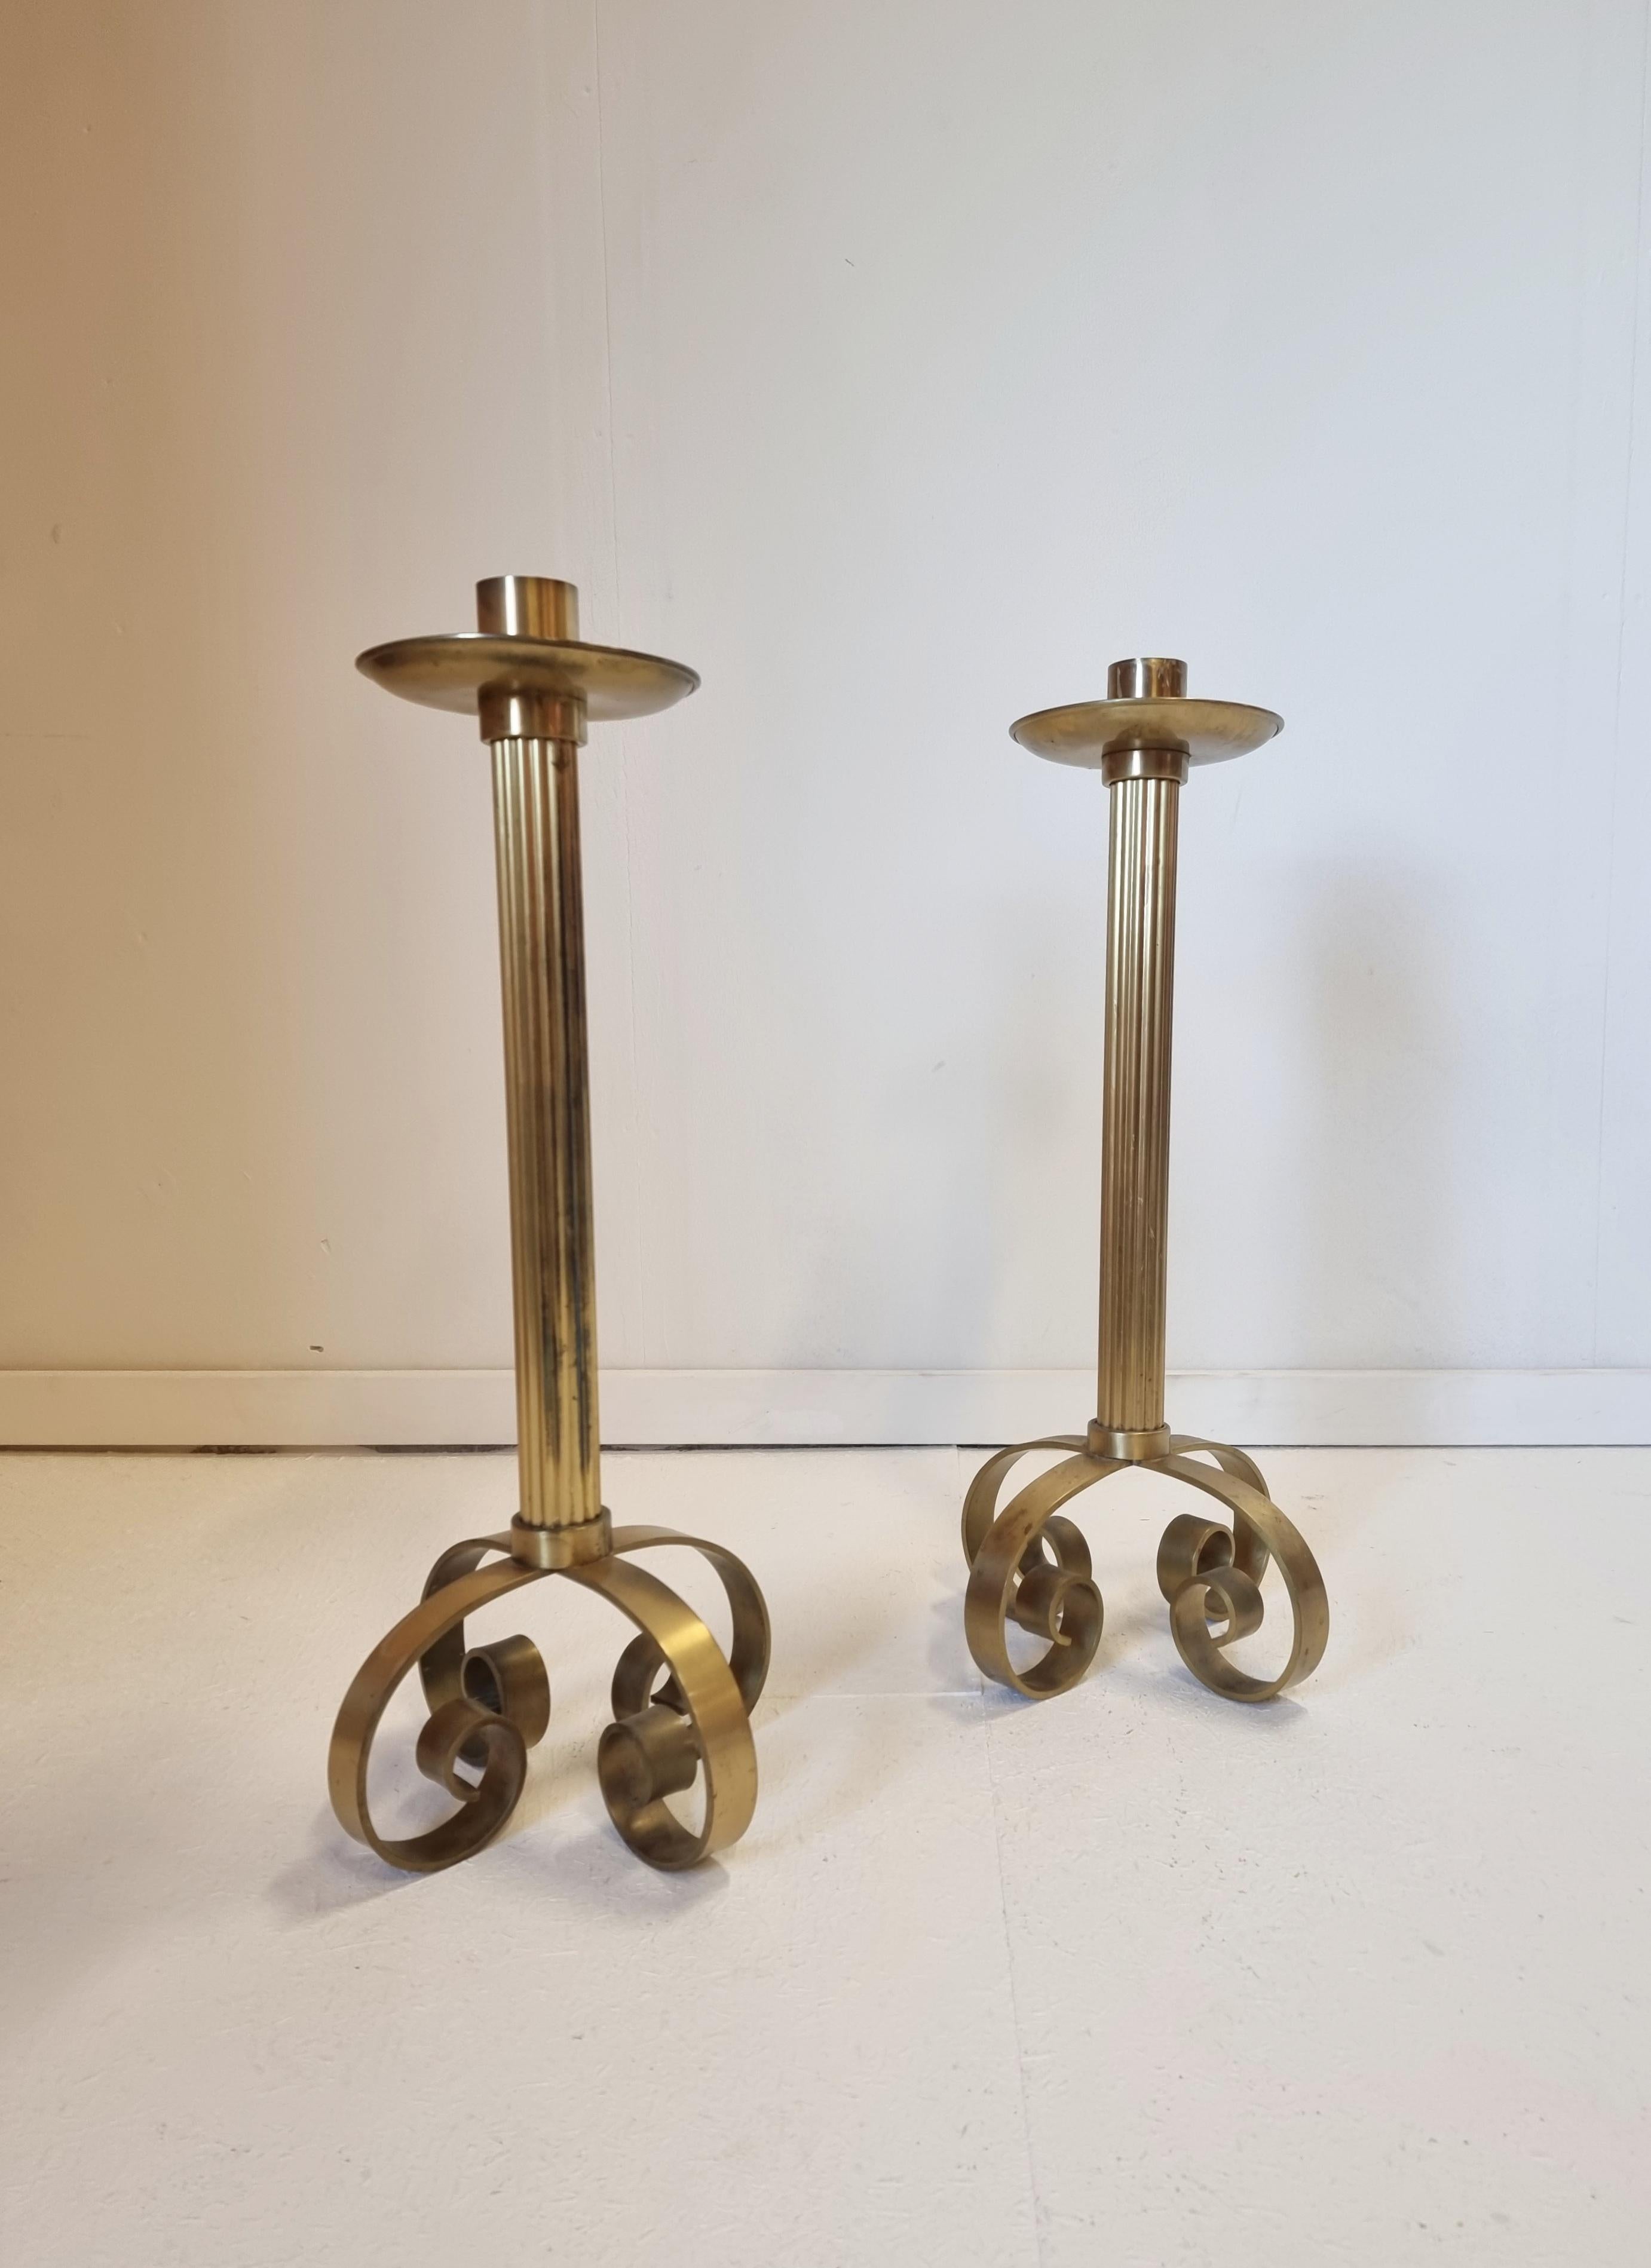 A pair of large candelabras in solid brass. Designed by Ivar Ålenius-Björk for Ystad Metall, Sweden, mid-1900s / Midcentury Modern. 

This pair is rare and with beautiful patina. Marked: YSTAD METALL SWEDEN IÅB

Smaller signs of age and wear.